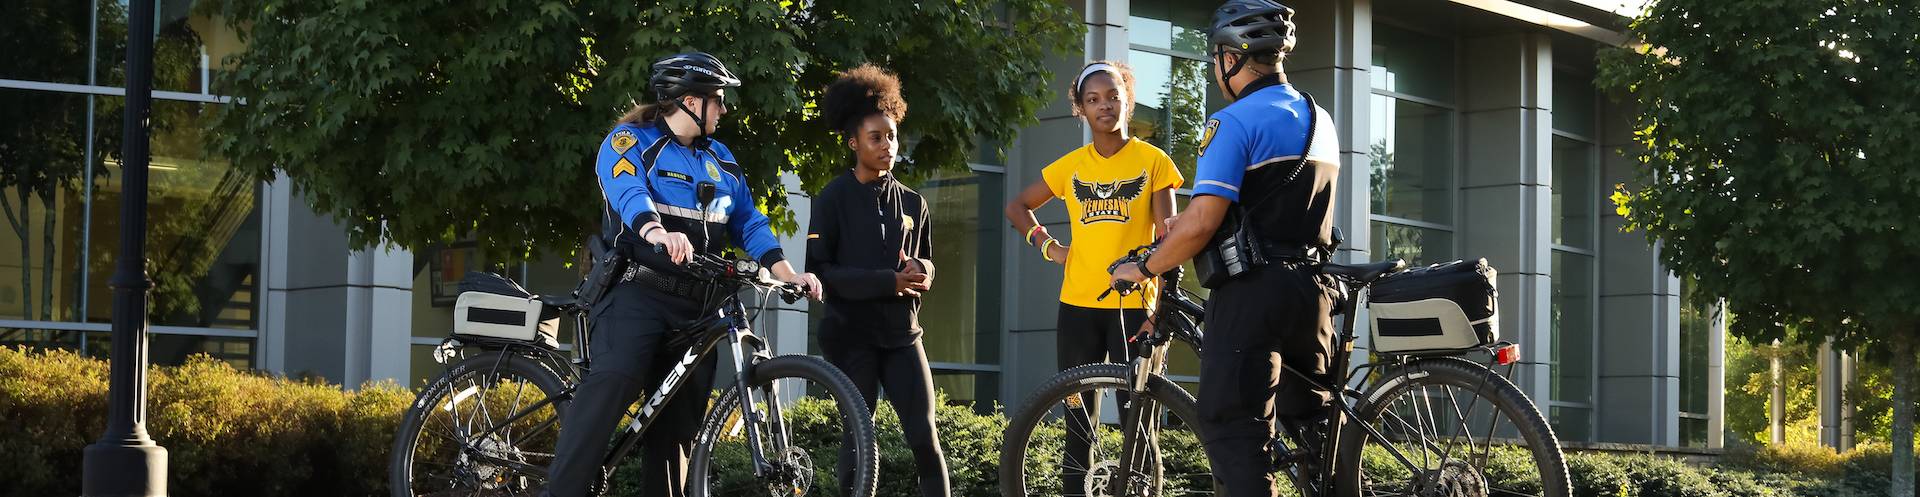 KSU PD bicycle officers and students